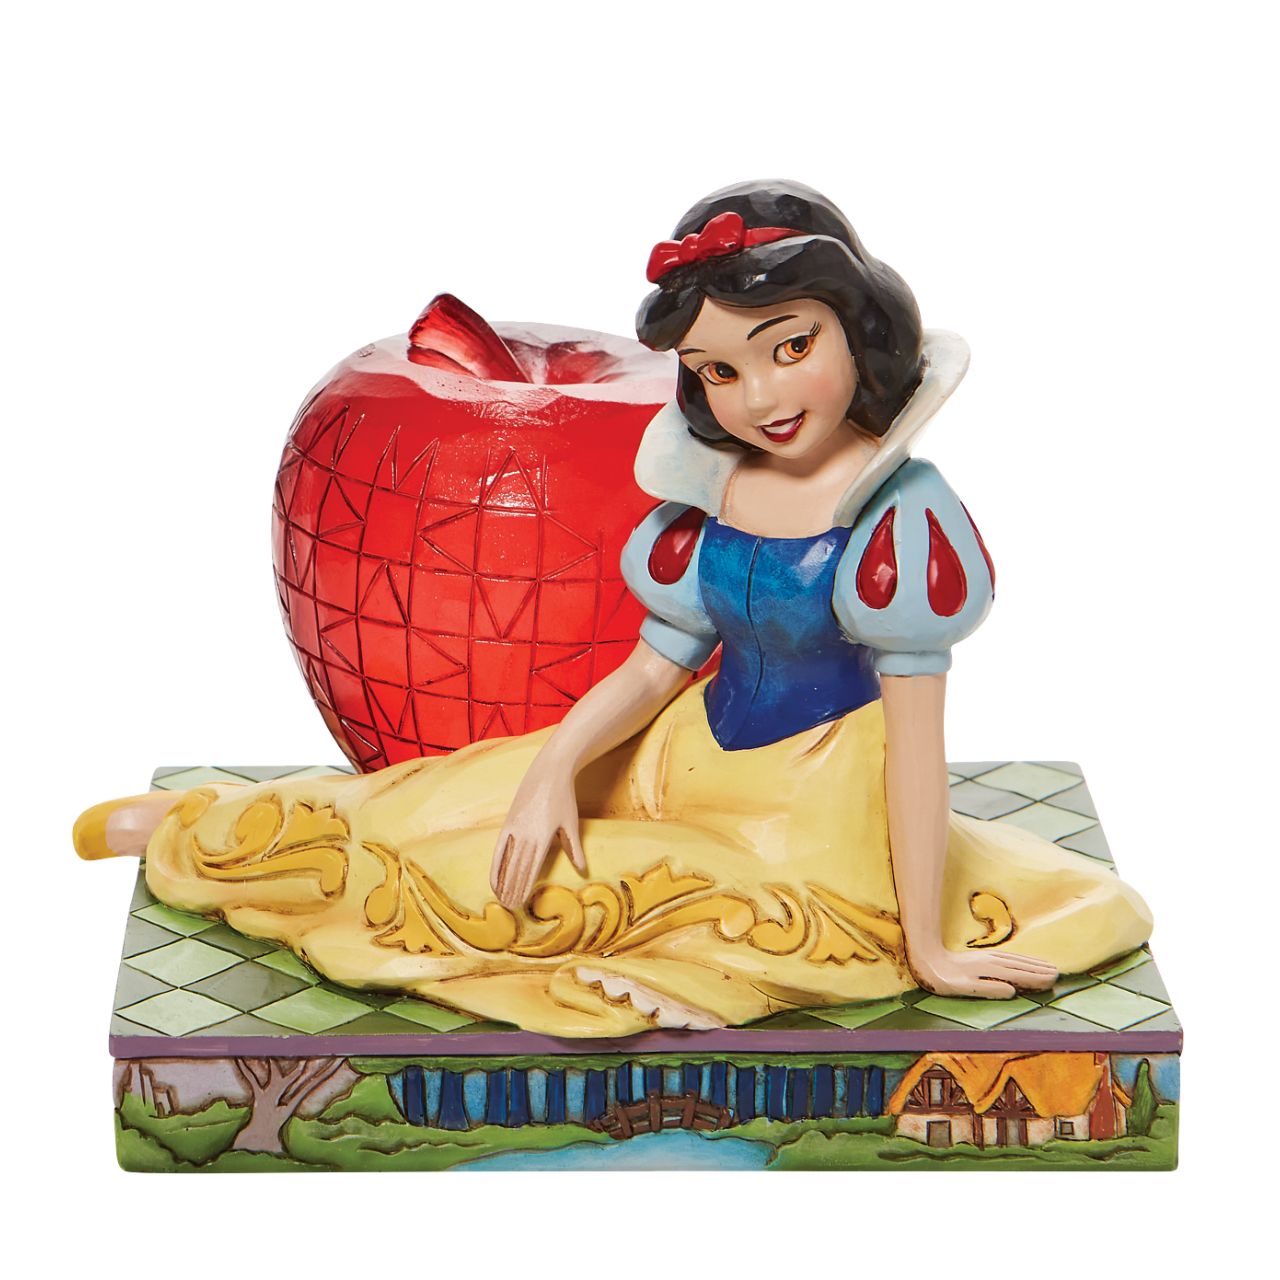 Jim Shore Disney Snow White with Apple Figurine  This Disney Traditions line by Jim Shore features iconic Walt Disney princesses with their famous props. With a base illustrating her story, this piece features Snow White in her famous gown next to a large apple. Packaged in a branded gift box.